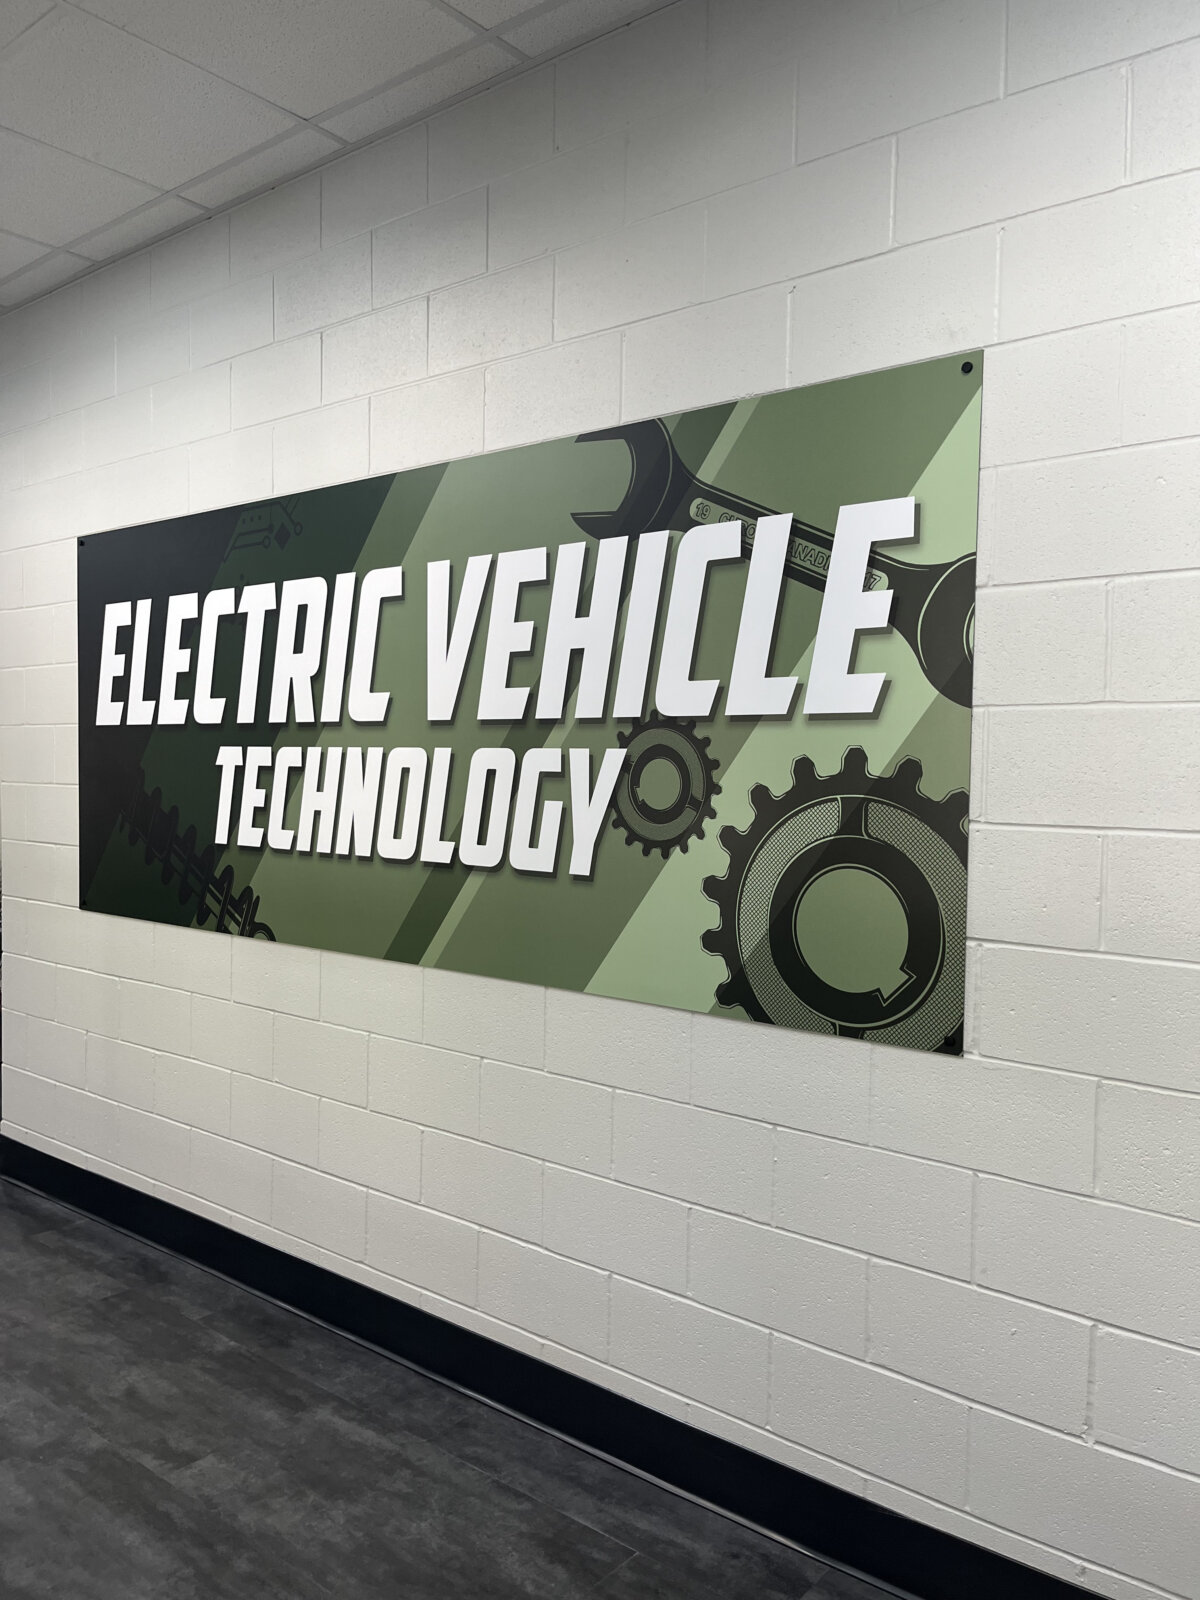 Electric Vehicle Technology at BEAT Center